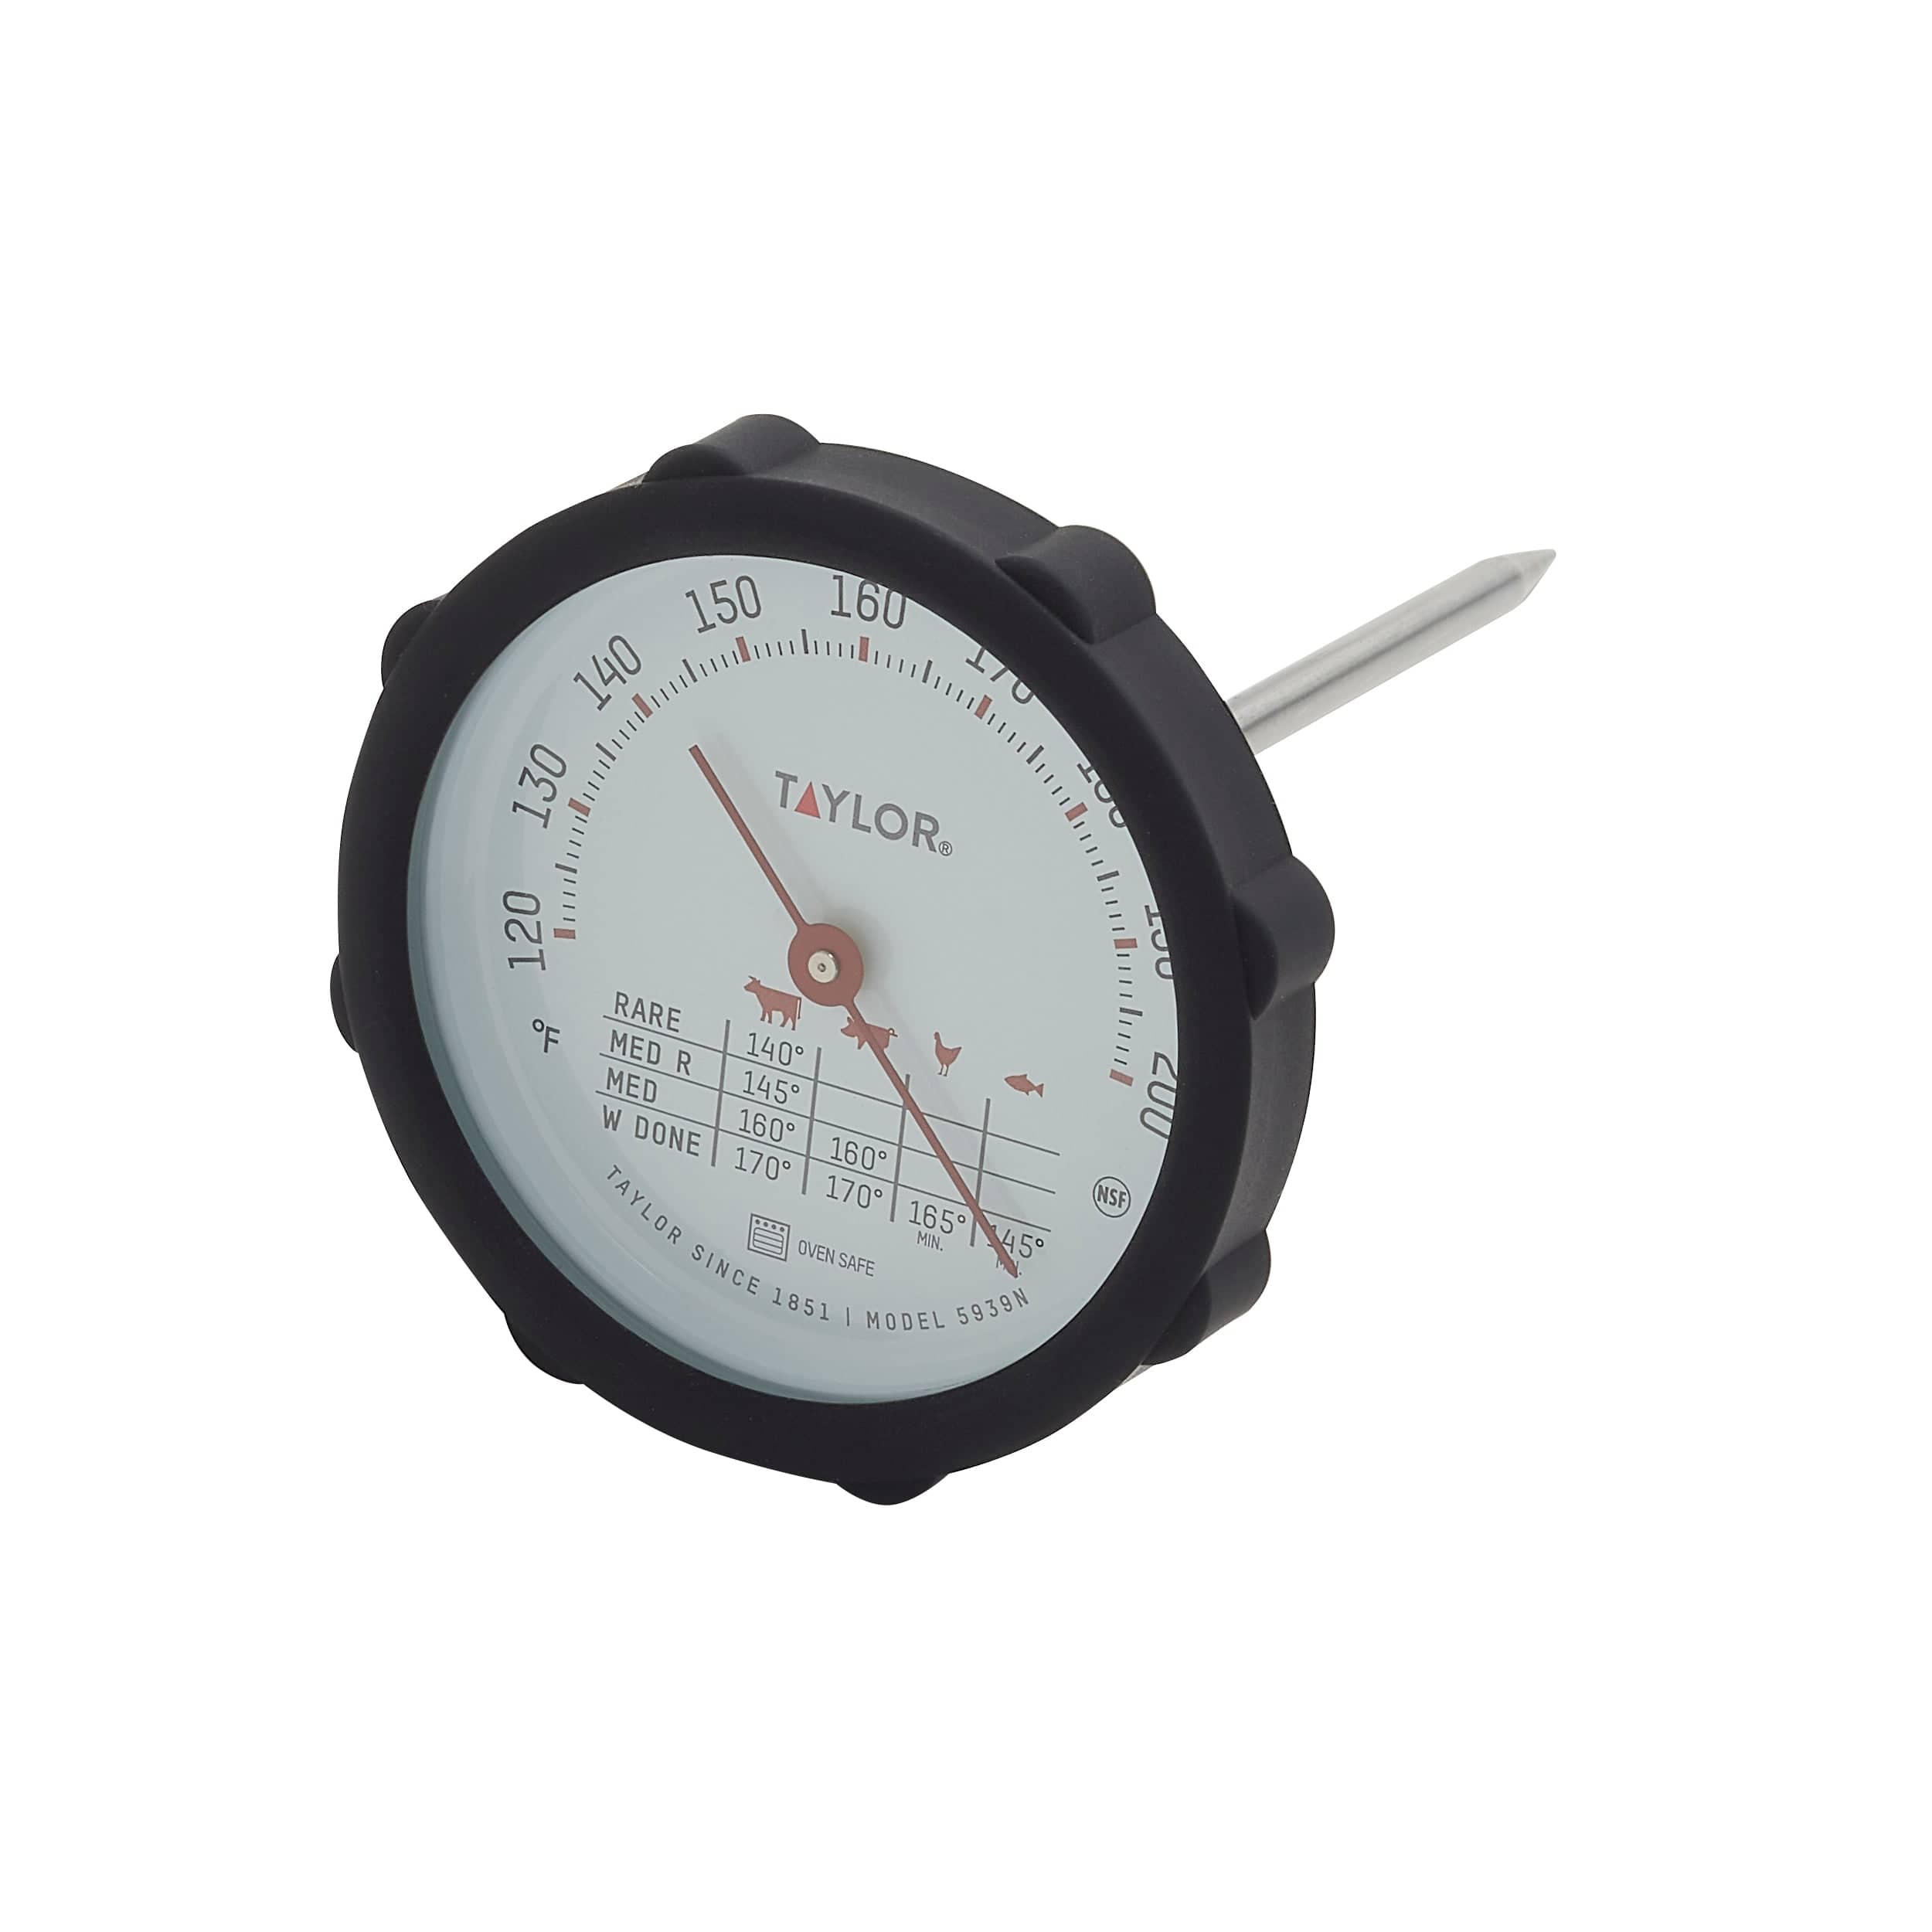 Leave-In Meat Thermometer